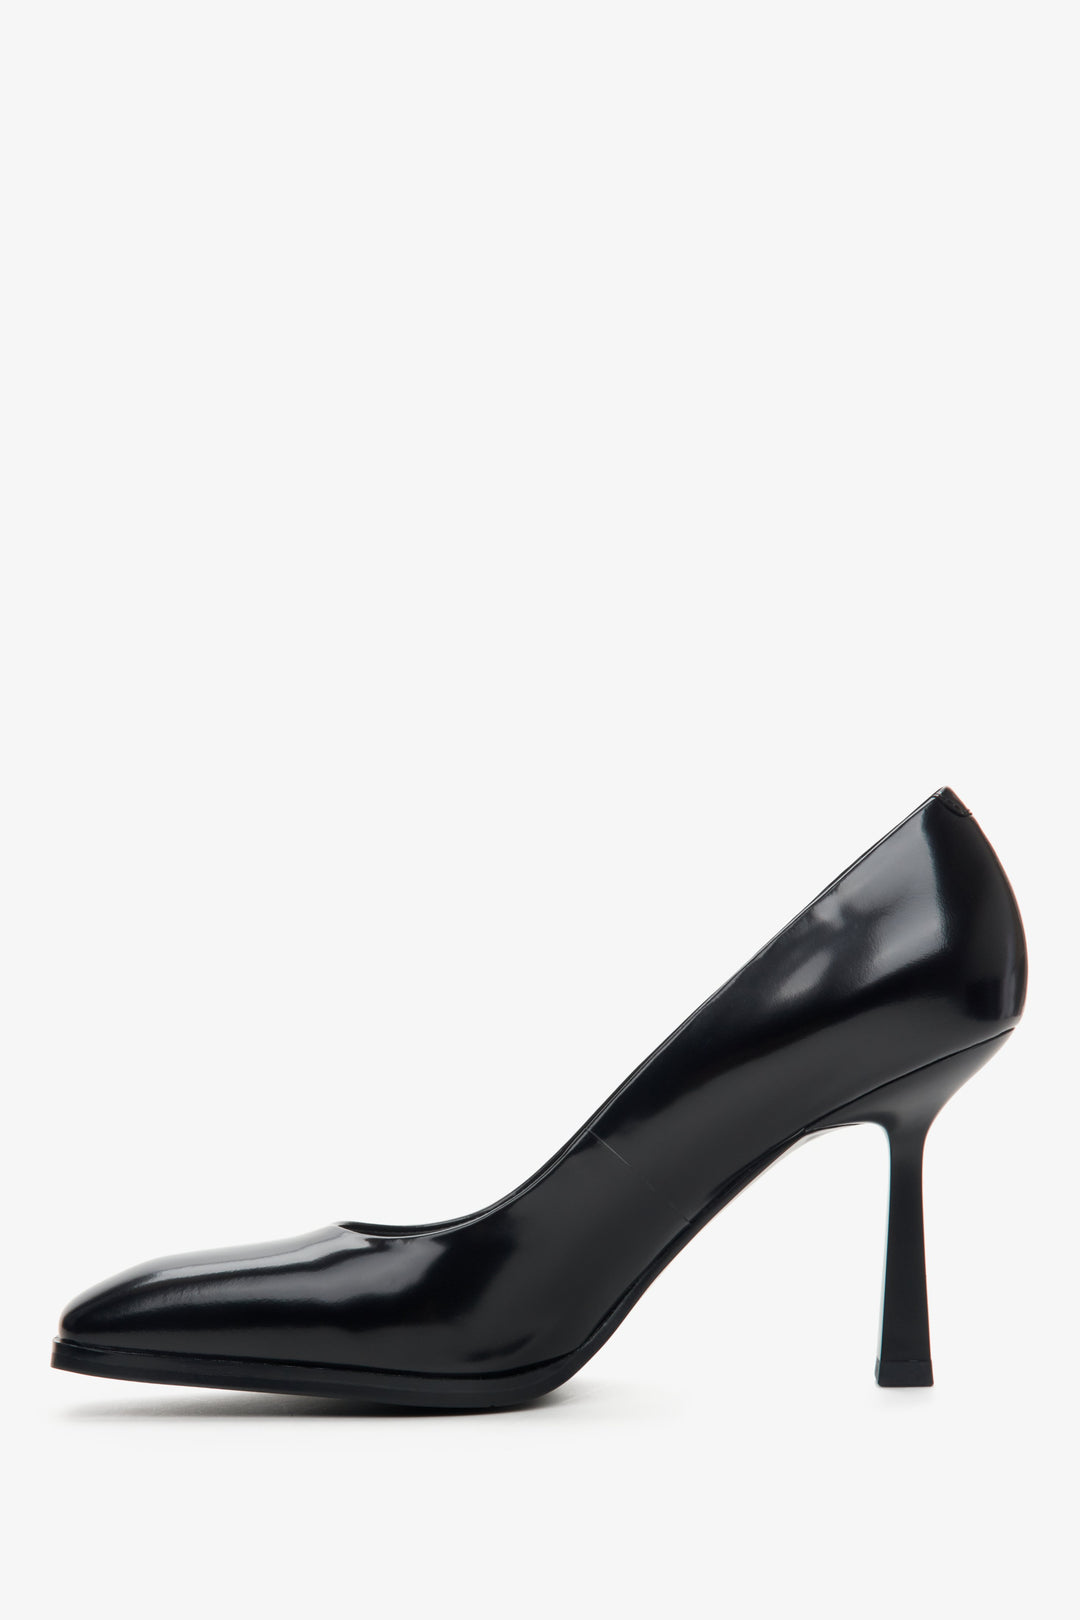 Women's black leather shoes with heels - side profile of the shoe.